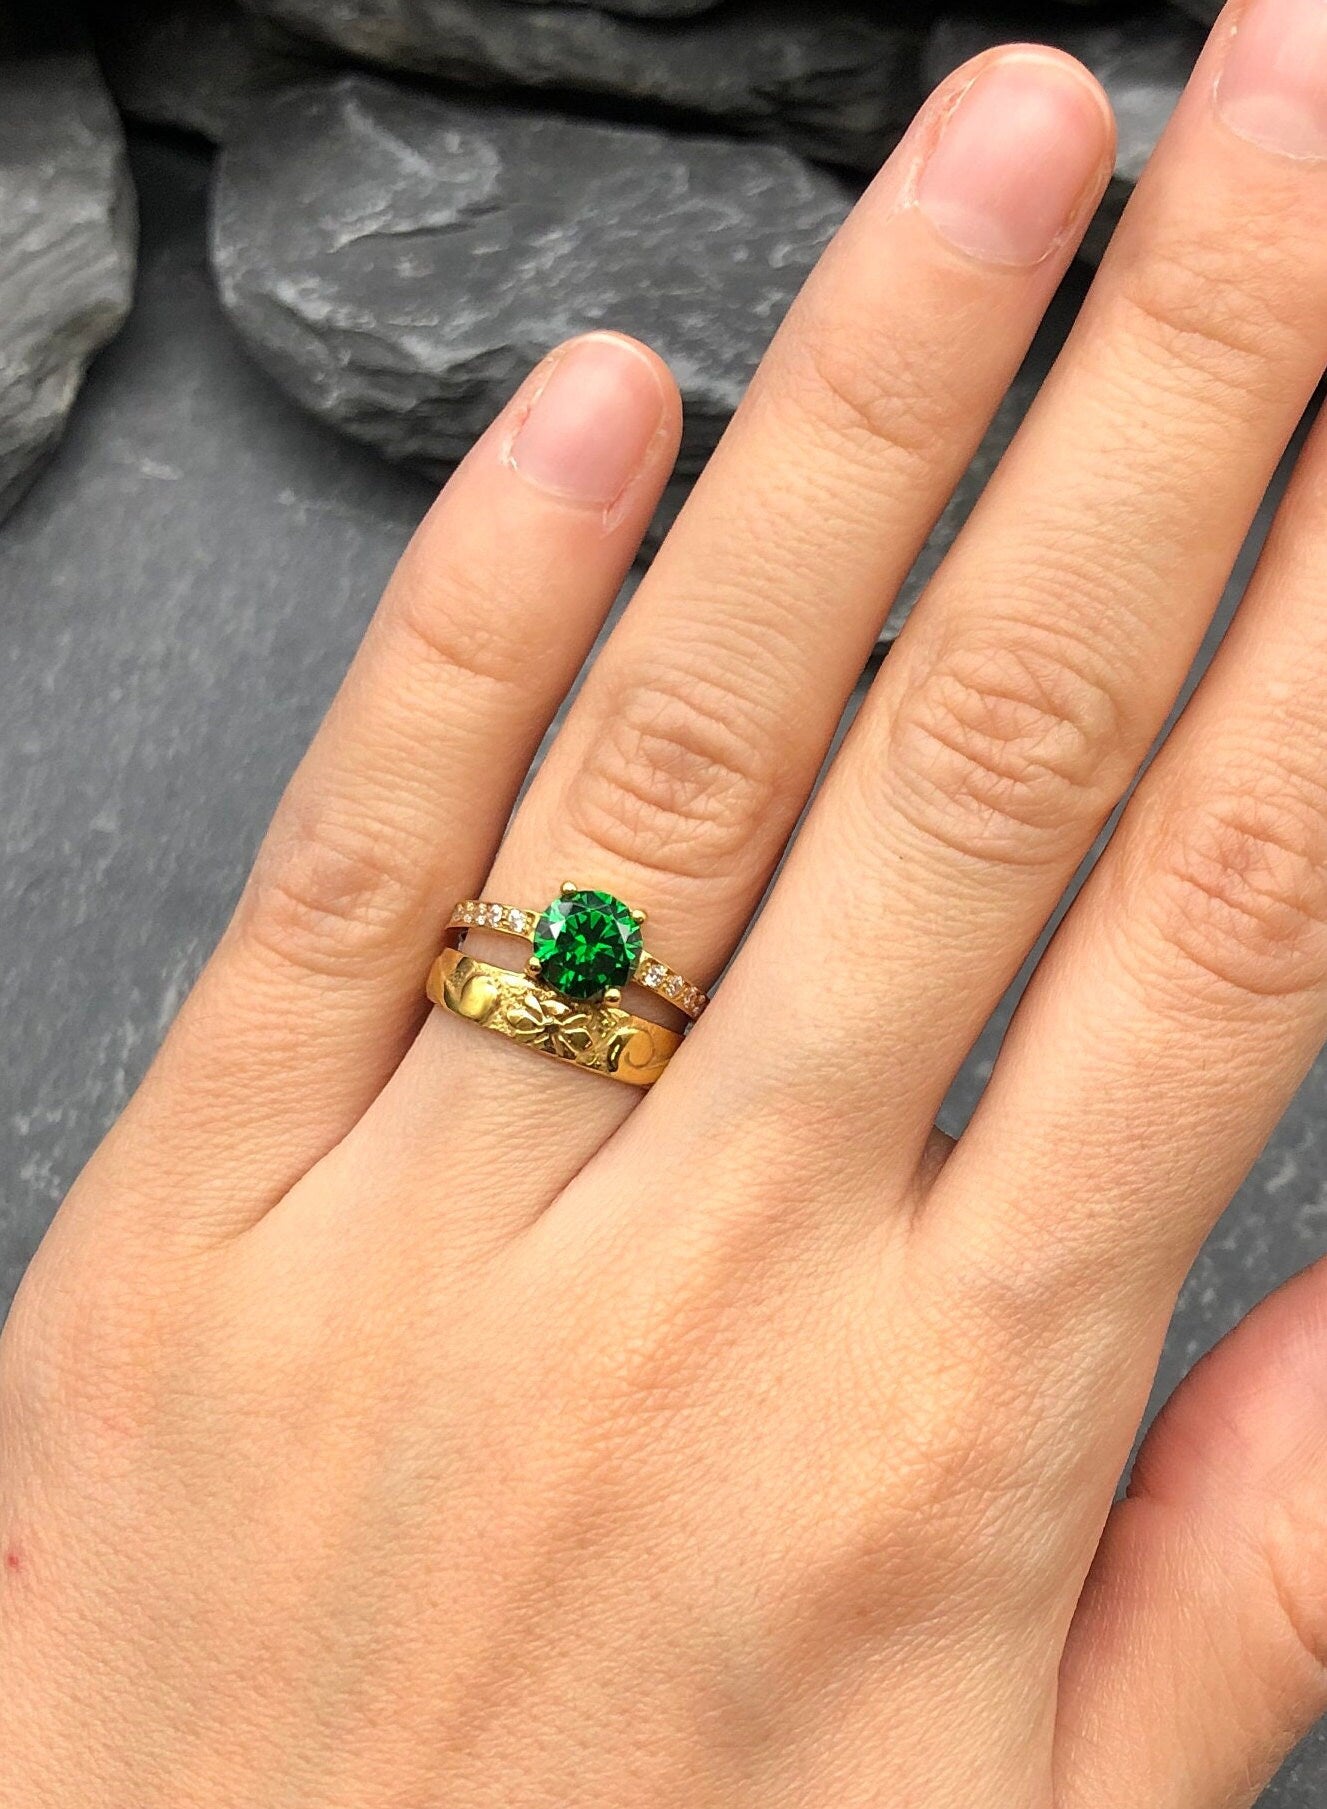 Gold Emerald Ring, Created Emerald, Double Band Ring, Two Rings Set, Vintage Ring, Stacked Rings, Green Stone Ring, Round Ring, Gold Vermeil